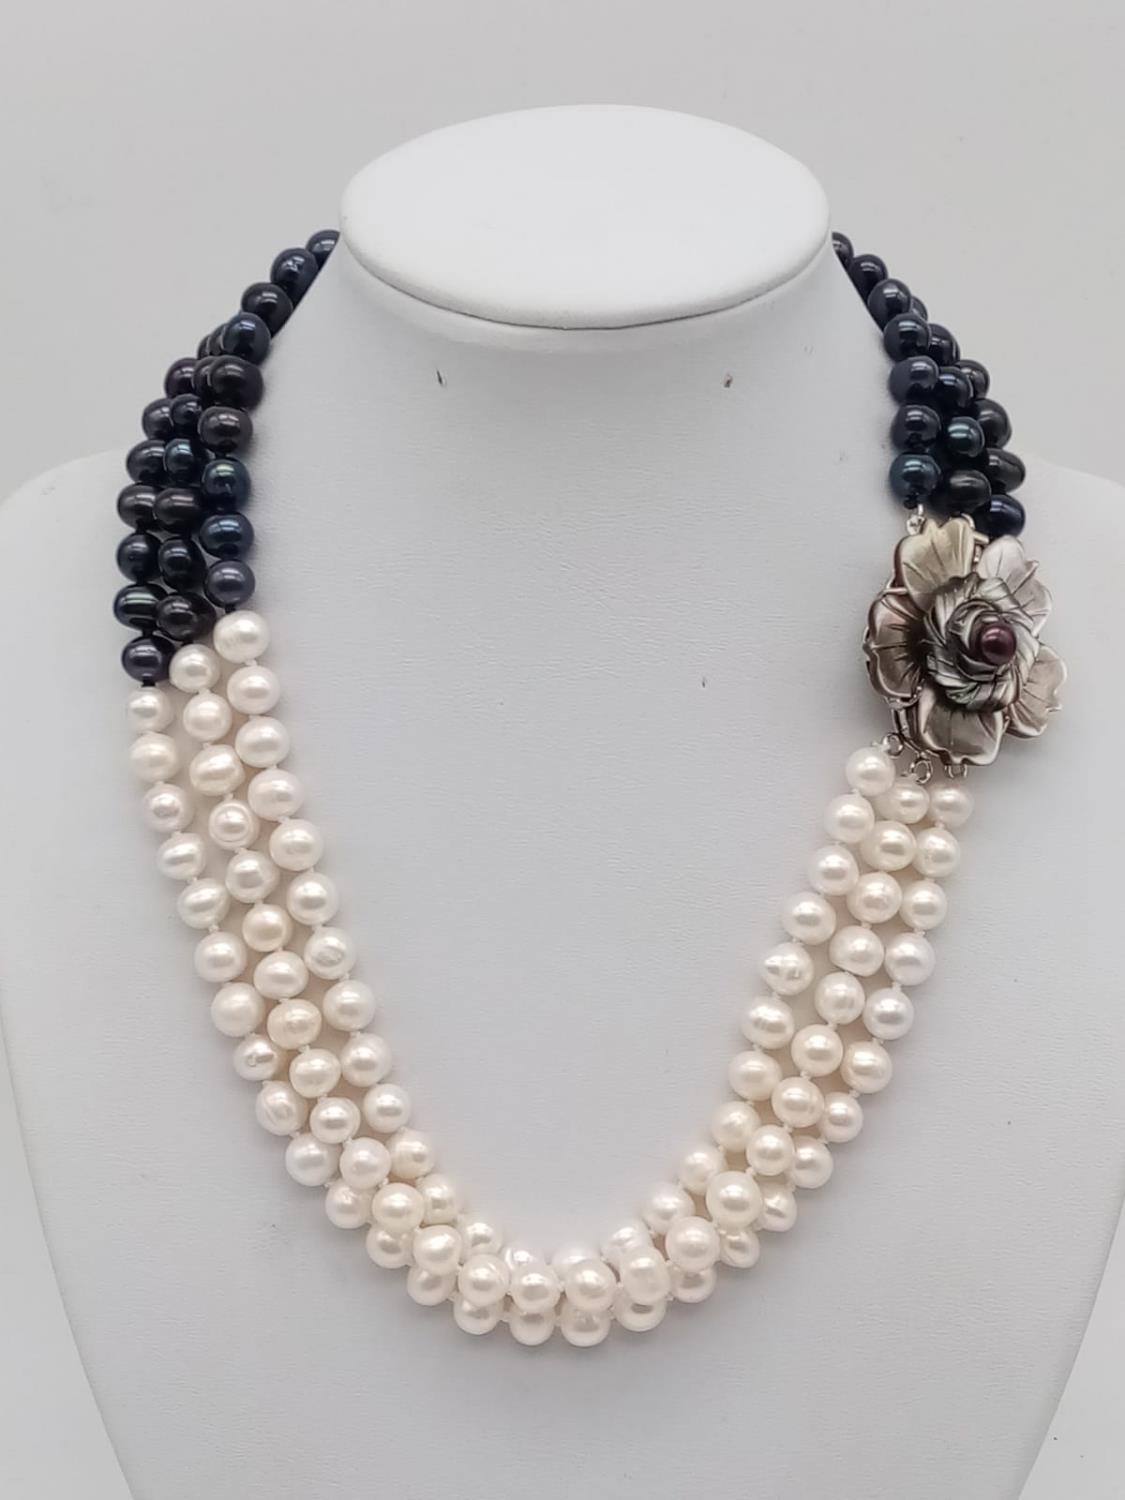 A glamourous, three rows of black and white pearls necklace with a flower shaped, hand carved, - Image 2 of 5